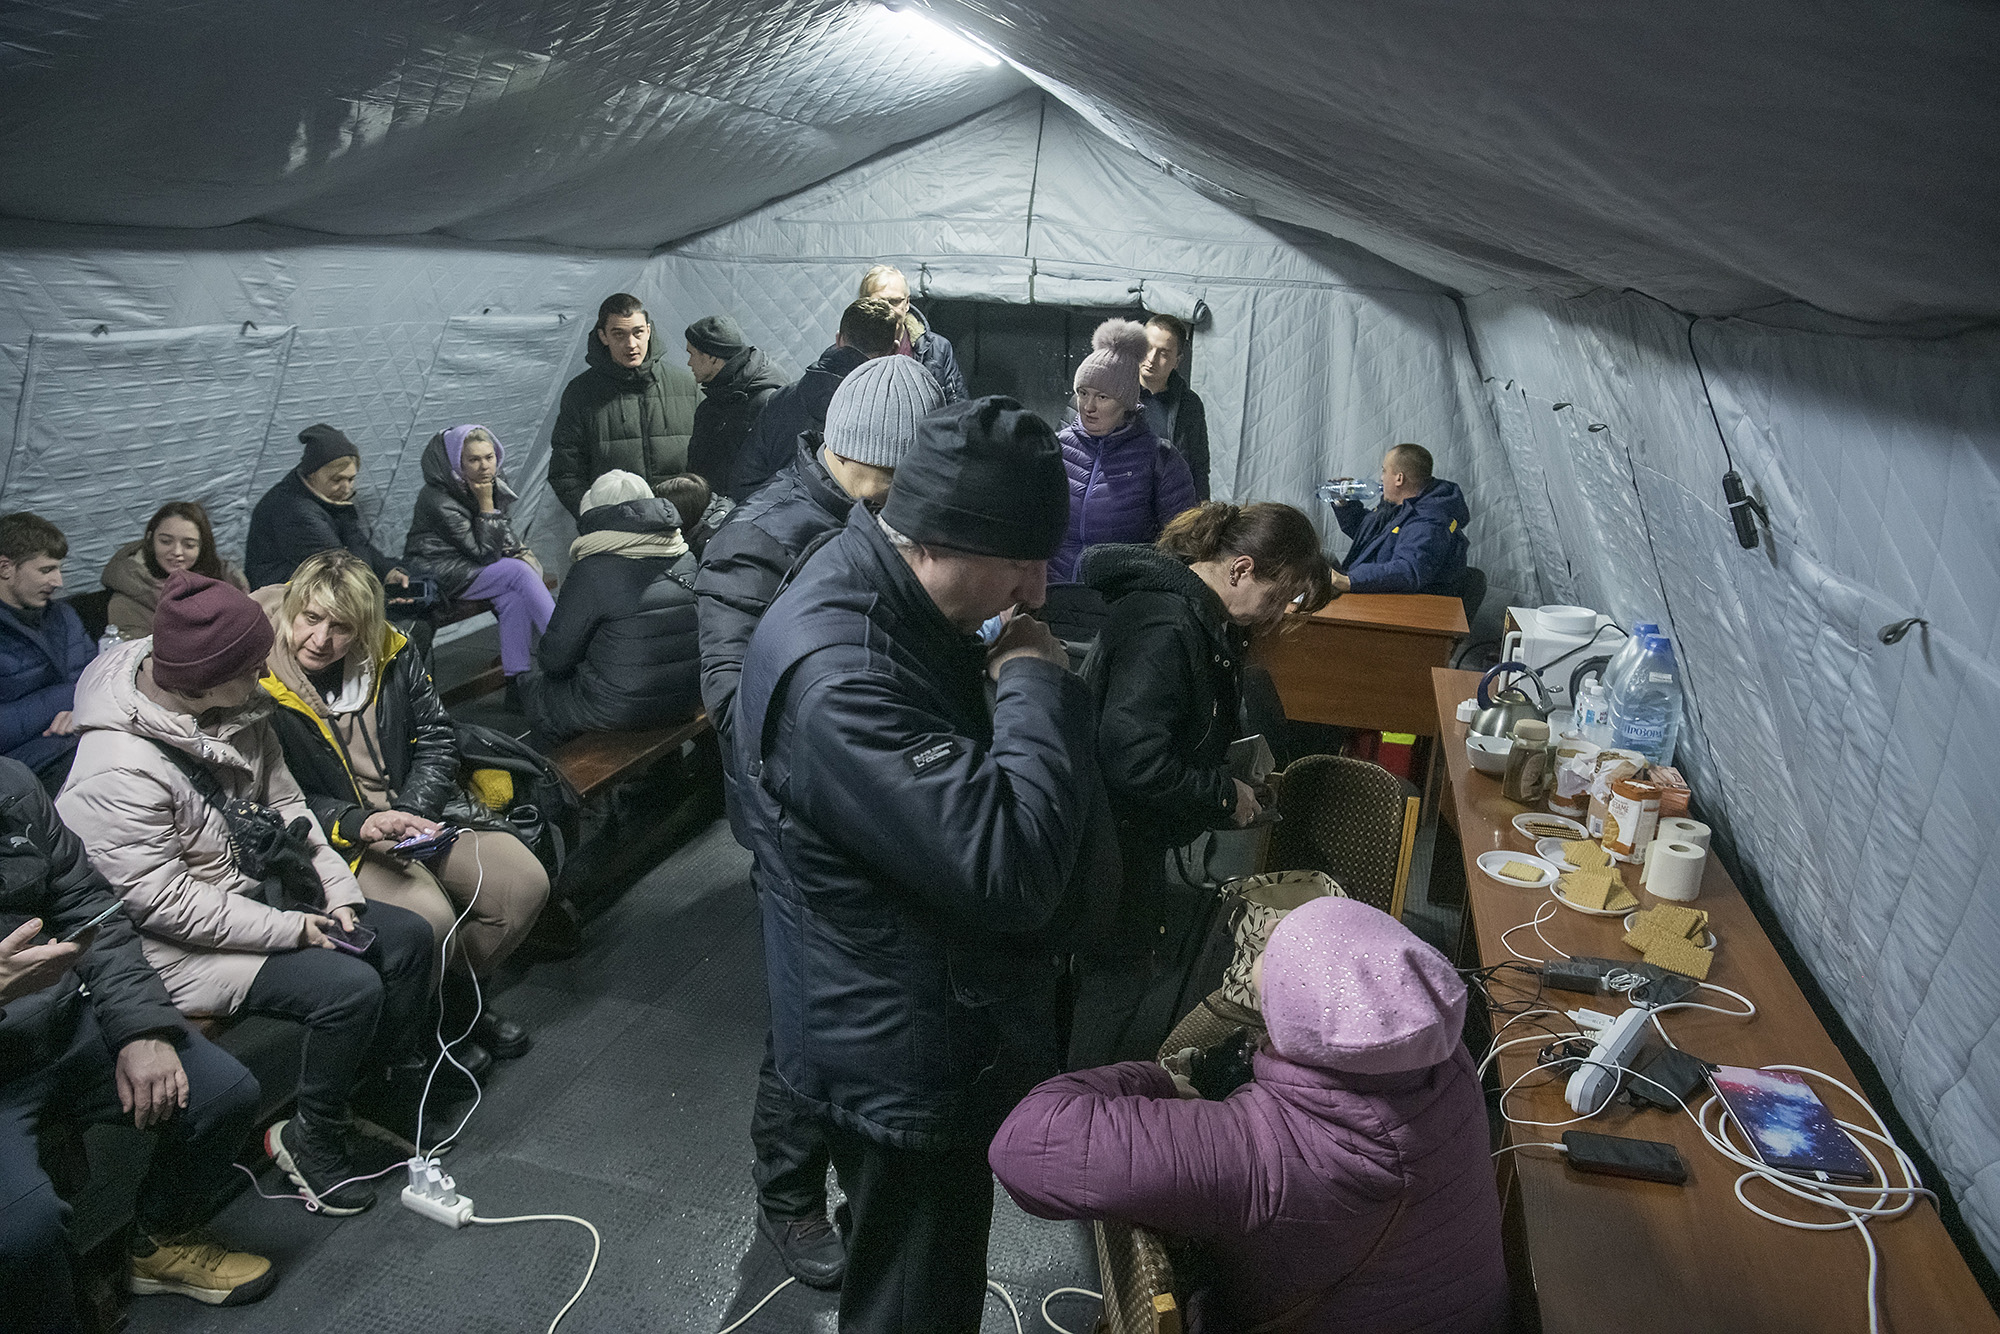 Local residents charge their devices, use internet connection and warm up inside  Centre of Invincibility after critical civil infrastructure was hit by Russian missile attacks in Kyiv, Ukraine November 24, 2022. (Photo by Maxym Marusenko/NurPhoto via Getty Images)